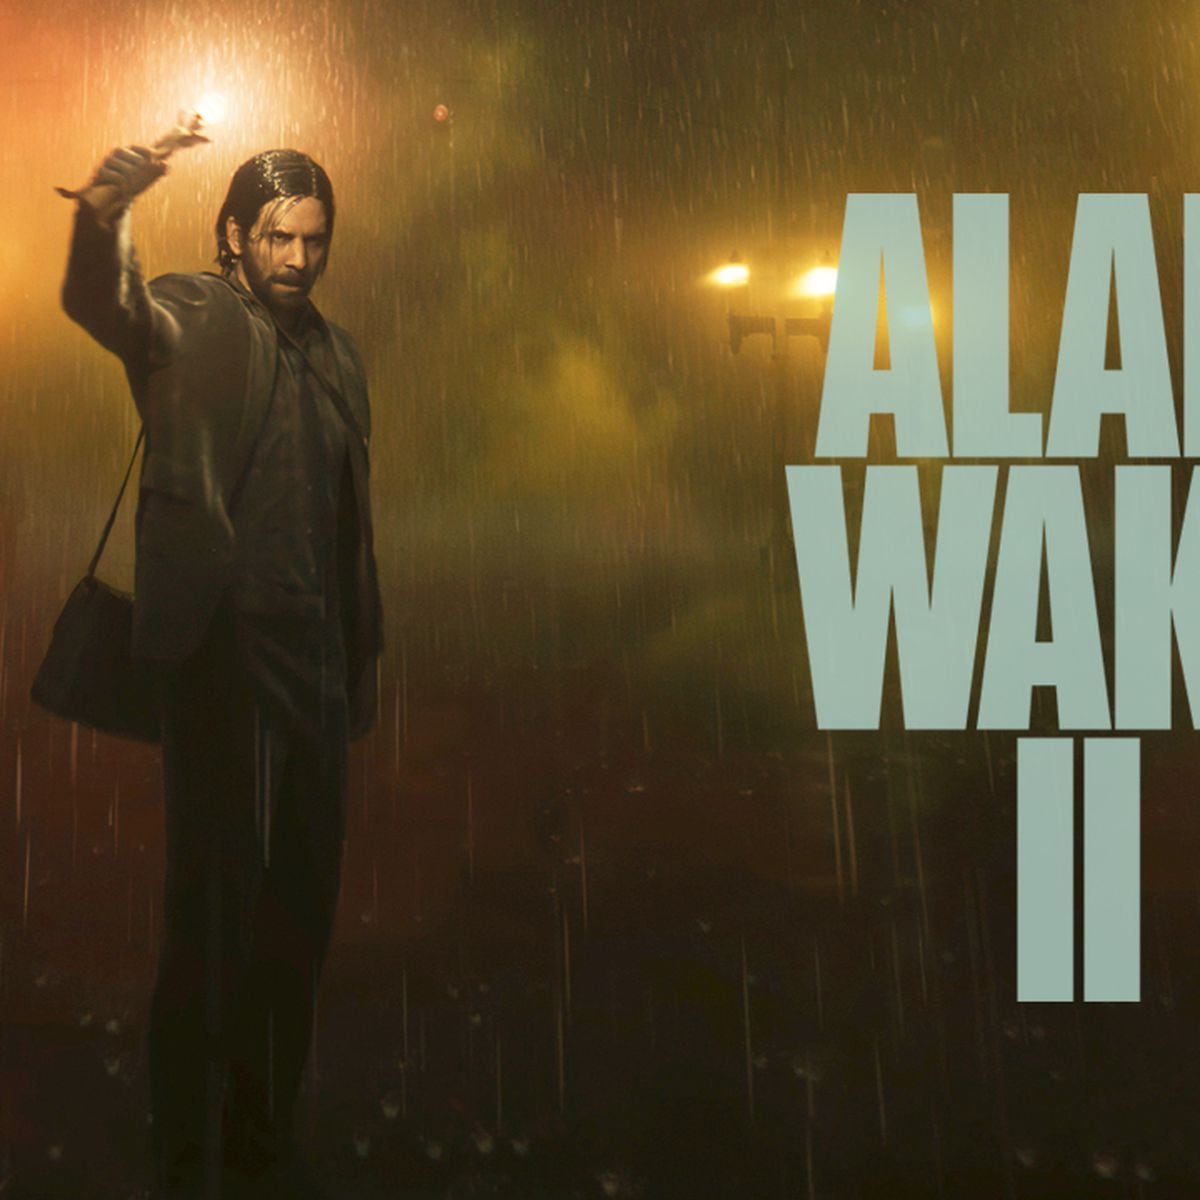 Remedy dropped Alan Wake 2 physical release for more time to polish